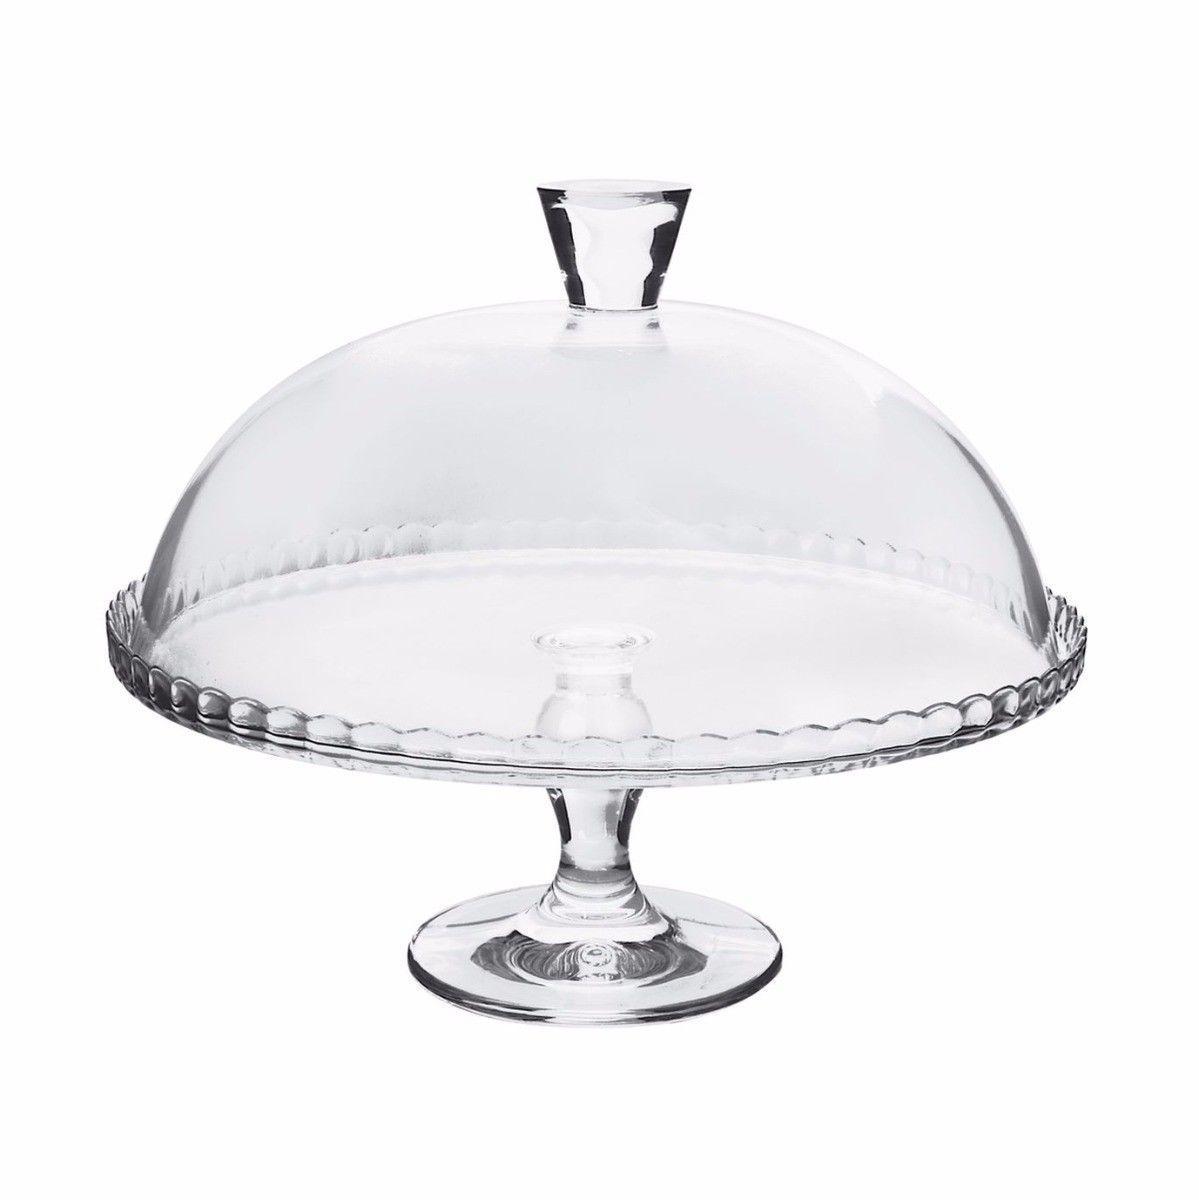 PB Footed Cake Dessert Table High Quality Glass Service Plate And Dome 33cm 95200 (Parcel Rate)